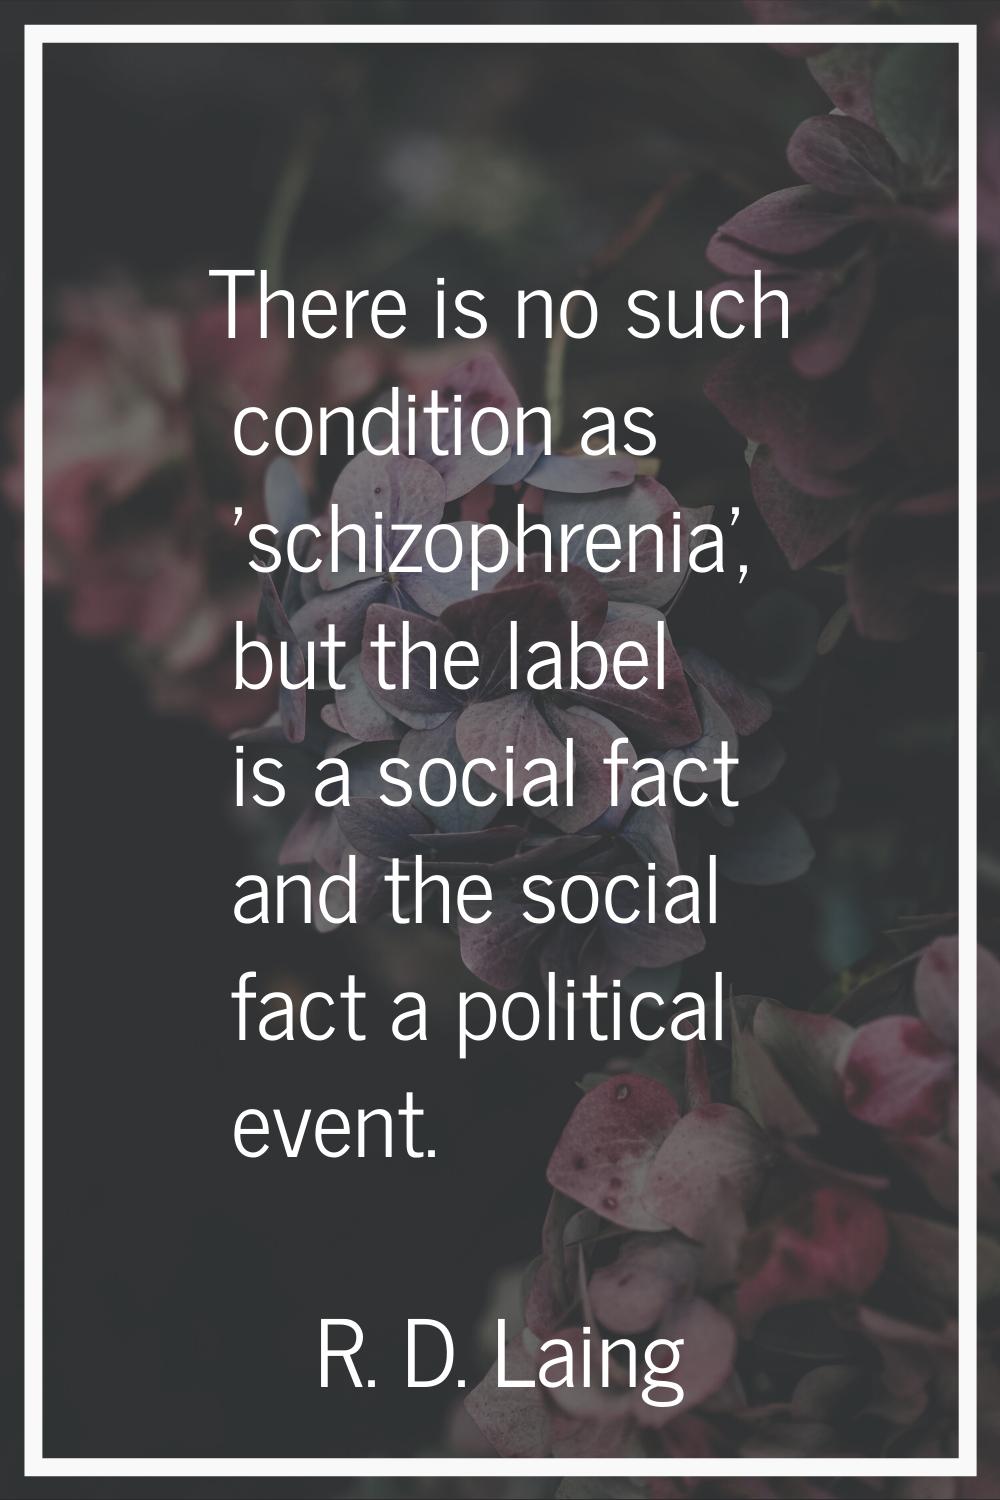 There is no such condition as 'schizophrenia', but the label is a social fact and the social fact a